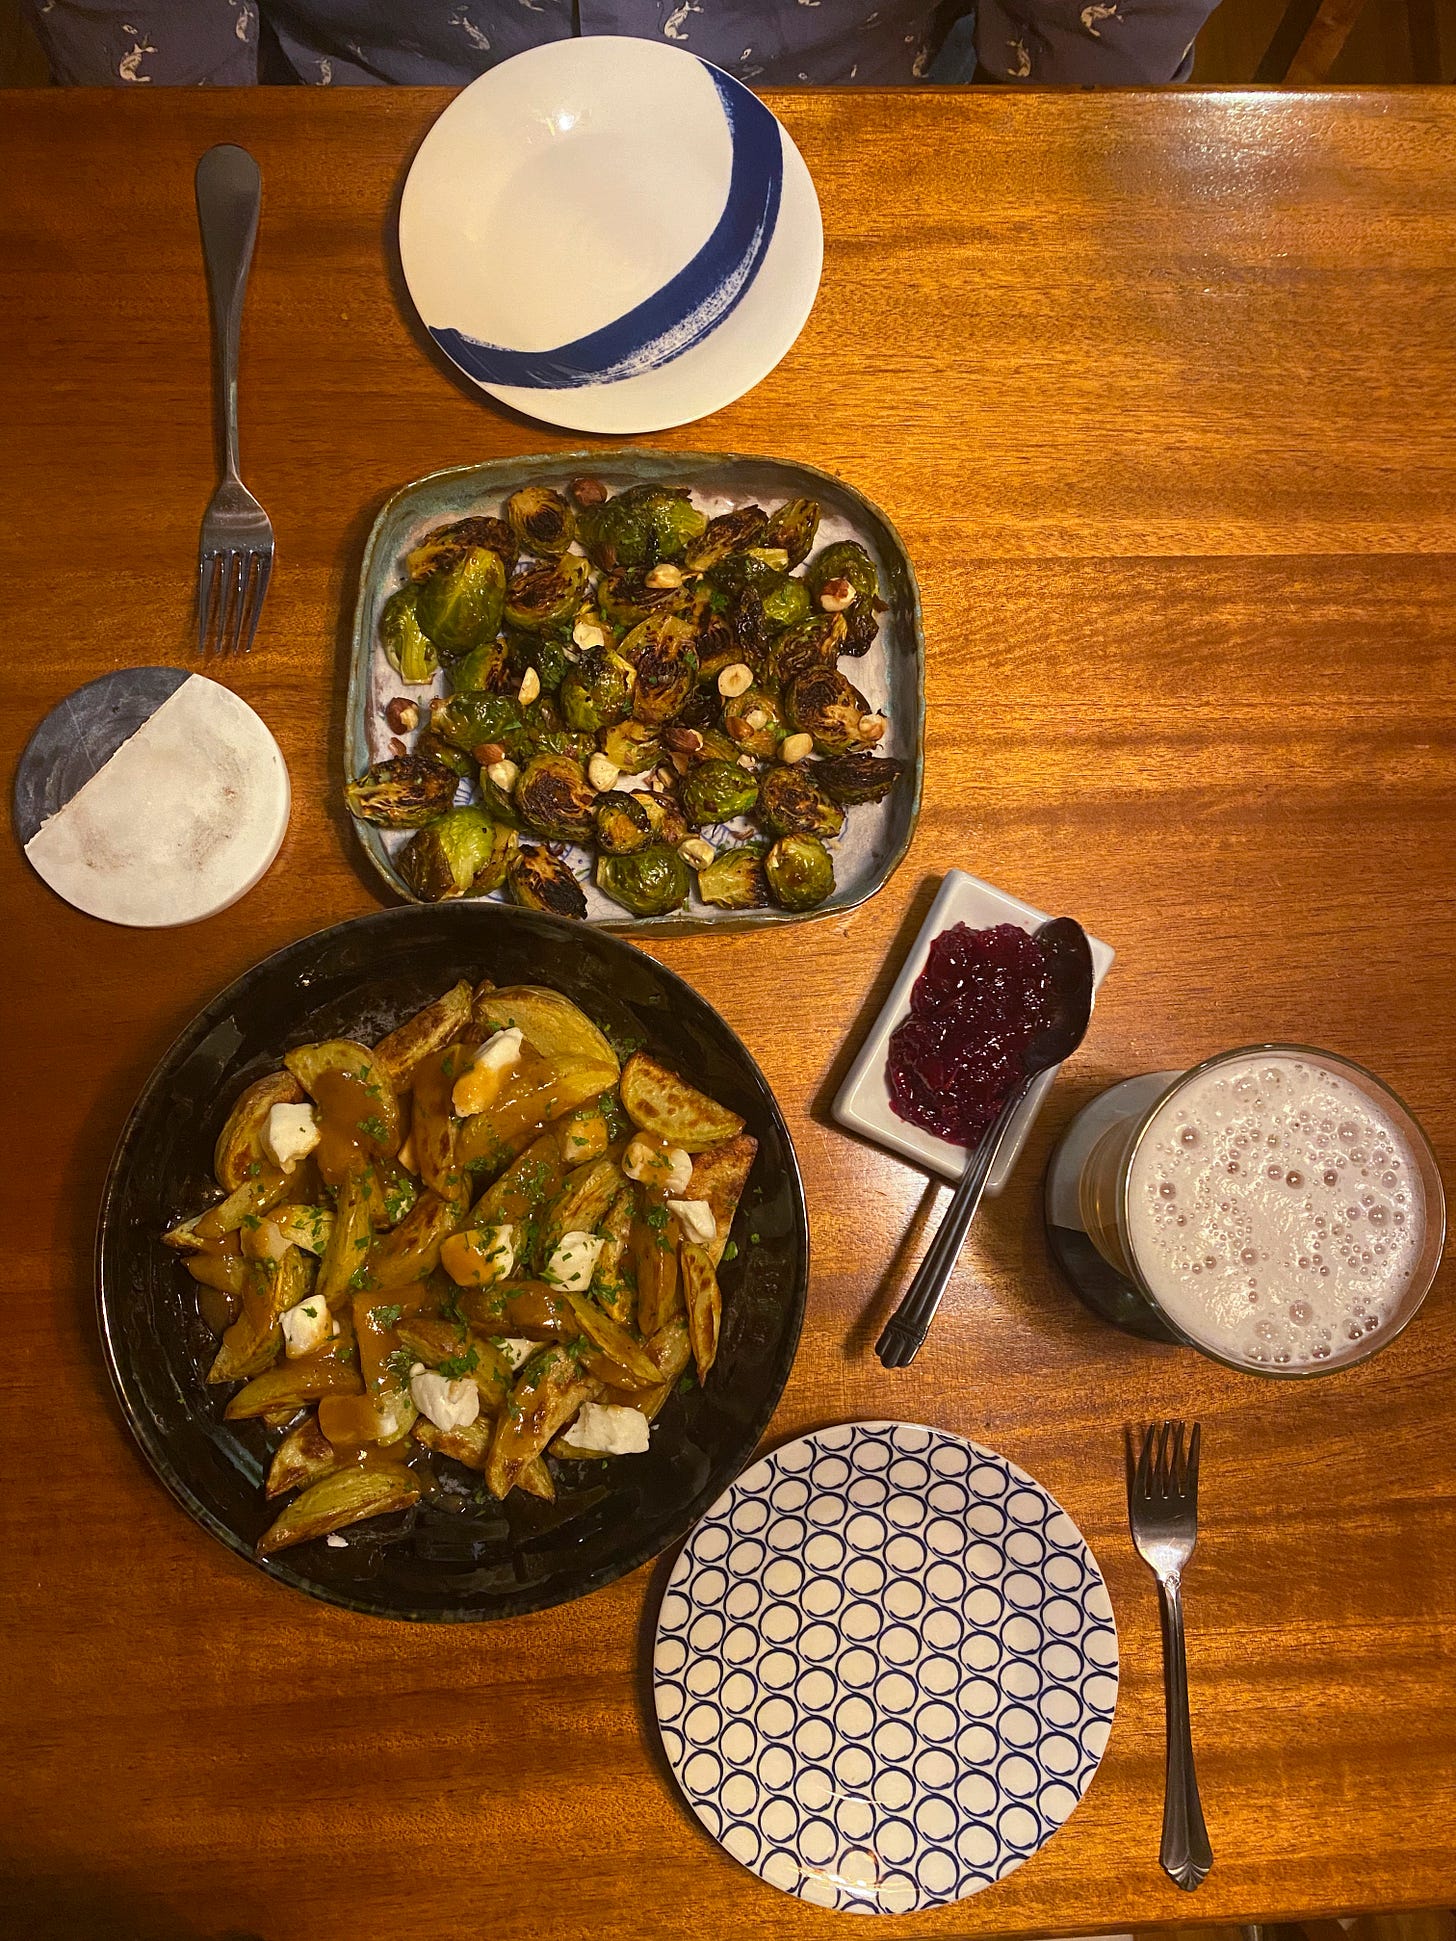 From above, a black shallow dish of poutine sprinkled with parsley and an irregular bluish dish of brussels sprouts, nicely browned with hazelnuts over top. Beside them is a ramekin of cranberry sauce with a spoon in it. The dishes are arranged between two small plates with forks next to them, and a glass of beer is nearest the plate at the bottom of the frame.